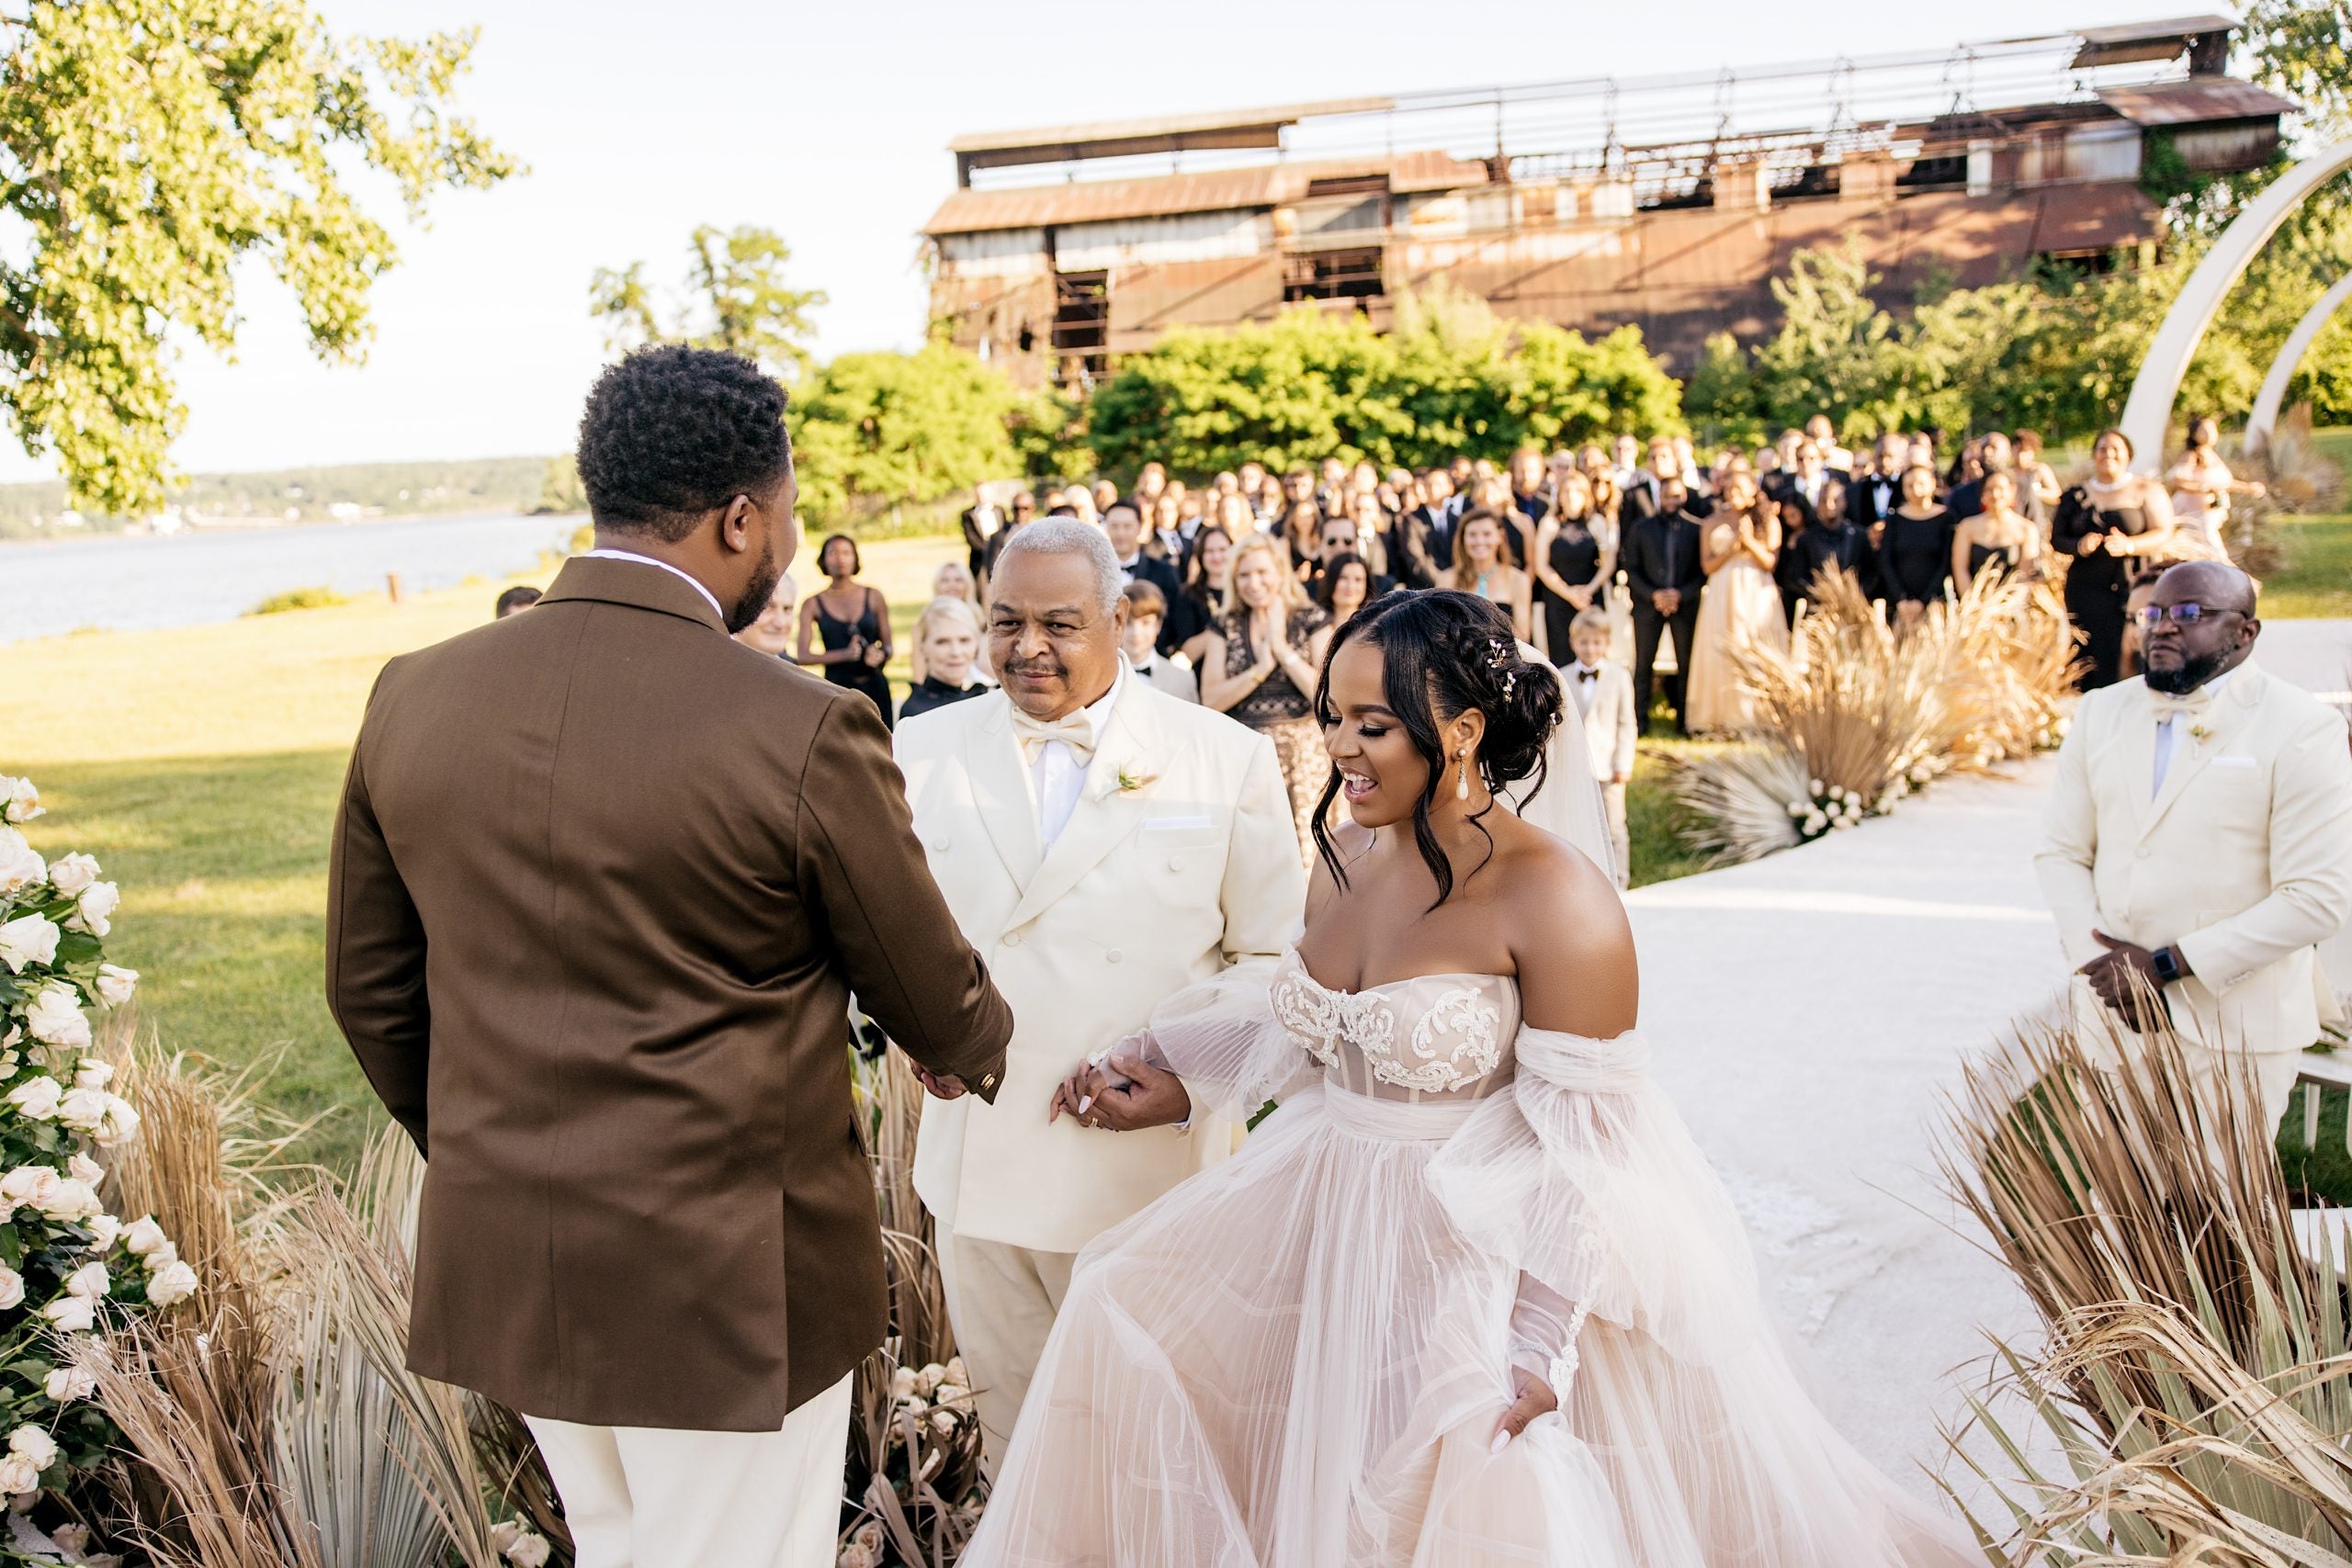 Bridal Bliss: Whitney And Siya's Wedding Was An Epic Three-Day Event Called 'Camp Madikane'